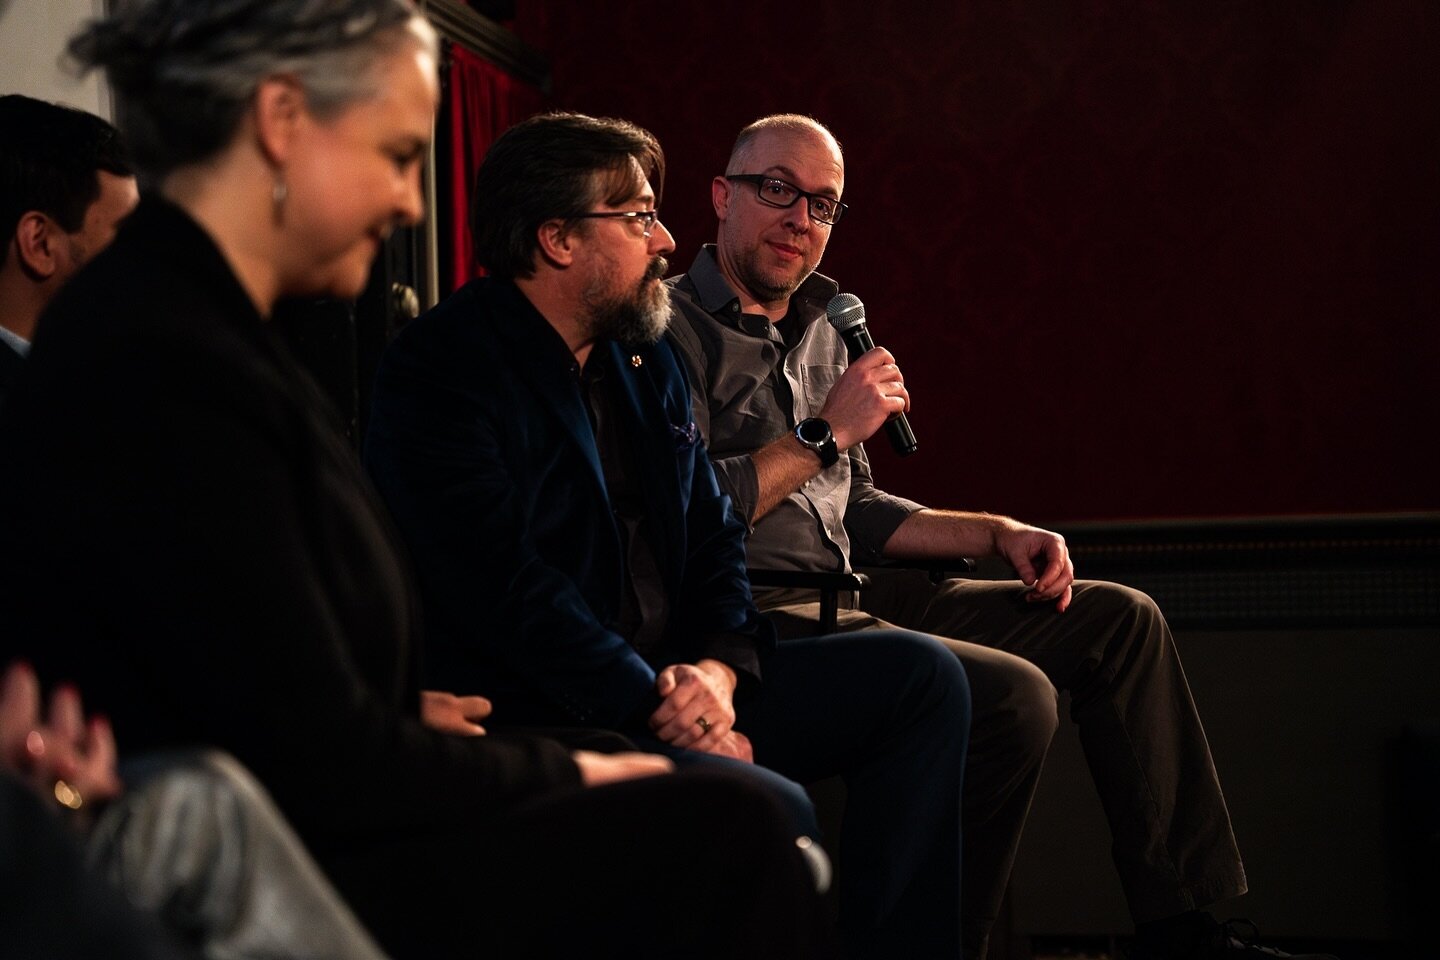 Director of Photography Talal Jabari fields a question during the talkback following the @upstate_films screening on 25 March. #dop #cinematography #cinematographerdirector p/c: @karenpearsonphoto